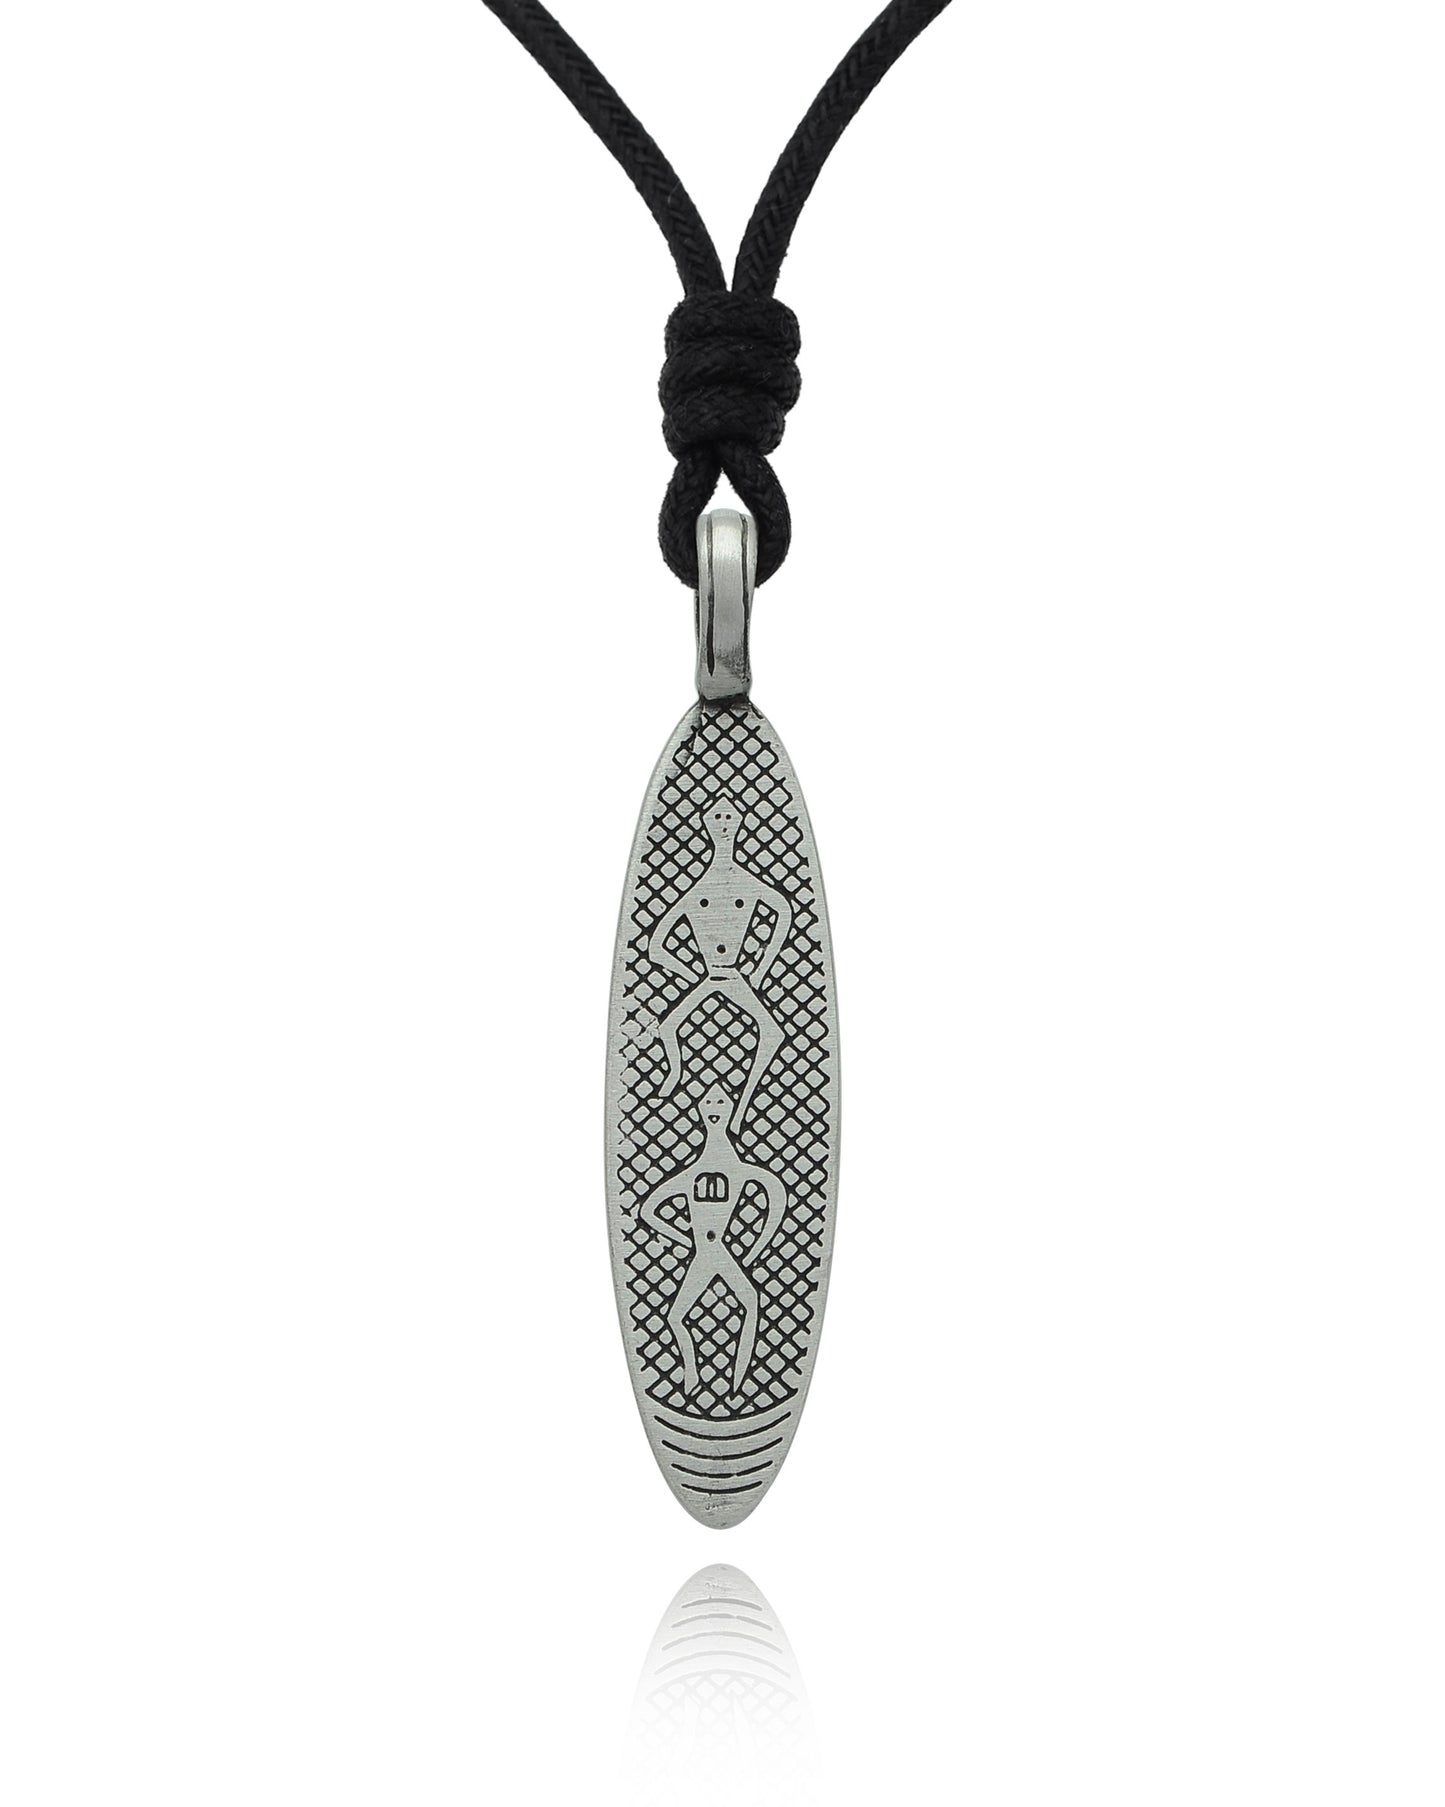 Stylish Aboriginal Art Surfboard Silver Pewter Charm Necklace Pendant Jewelry